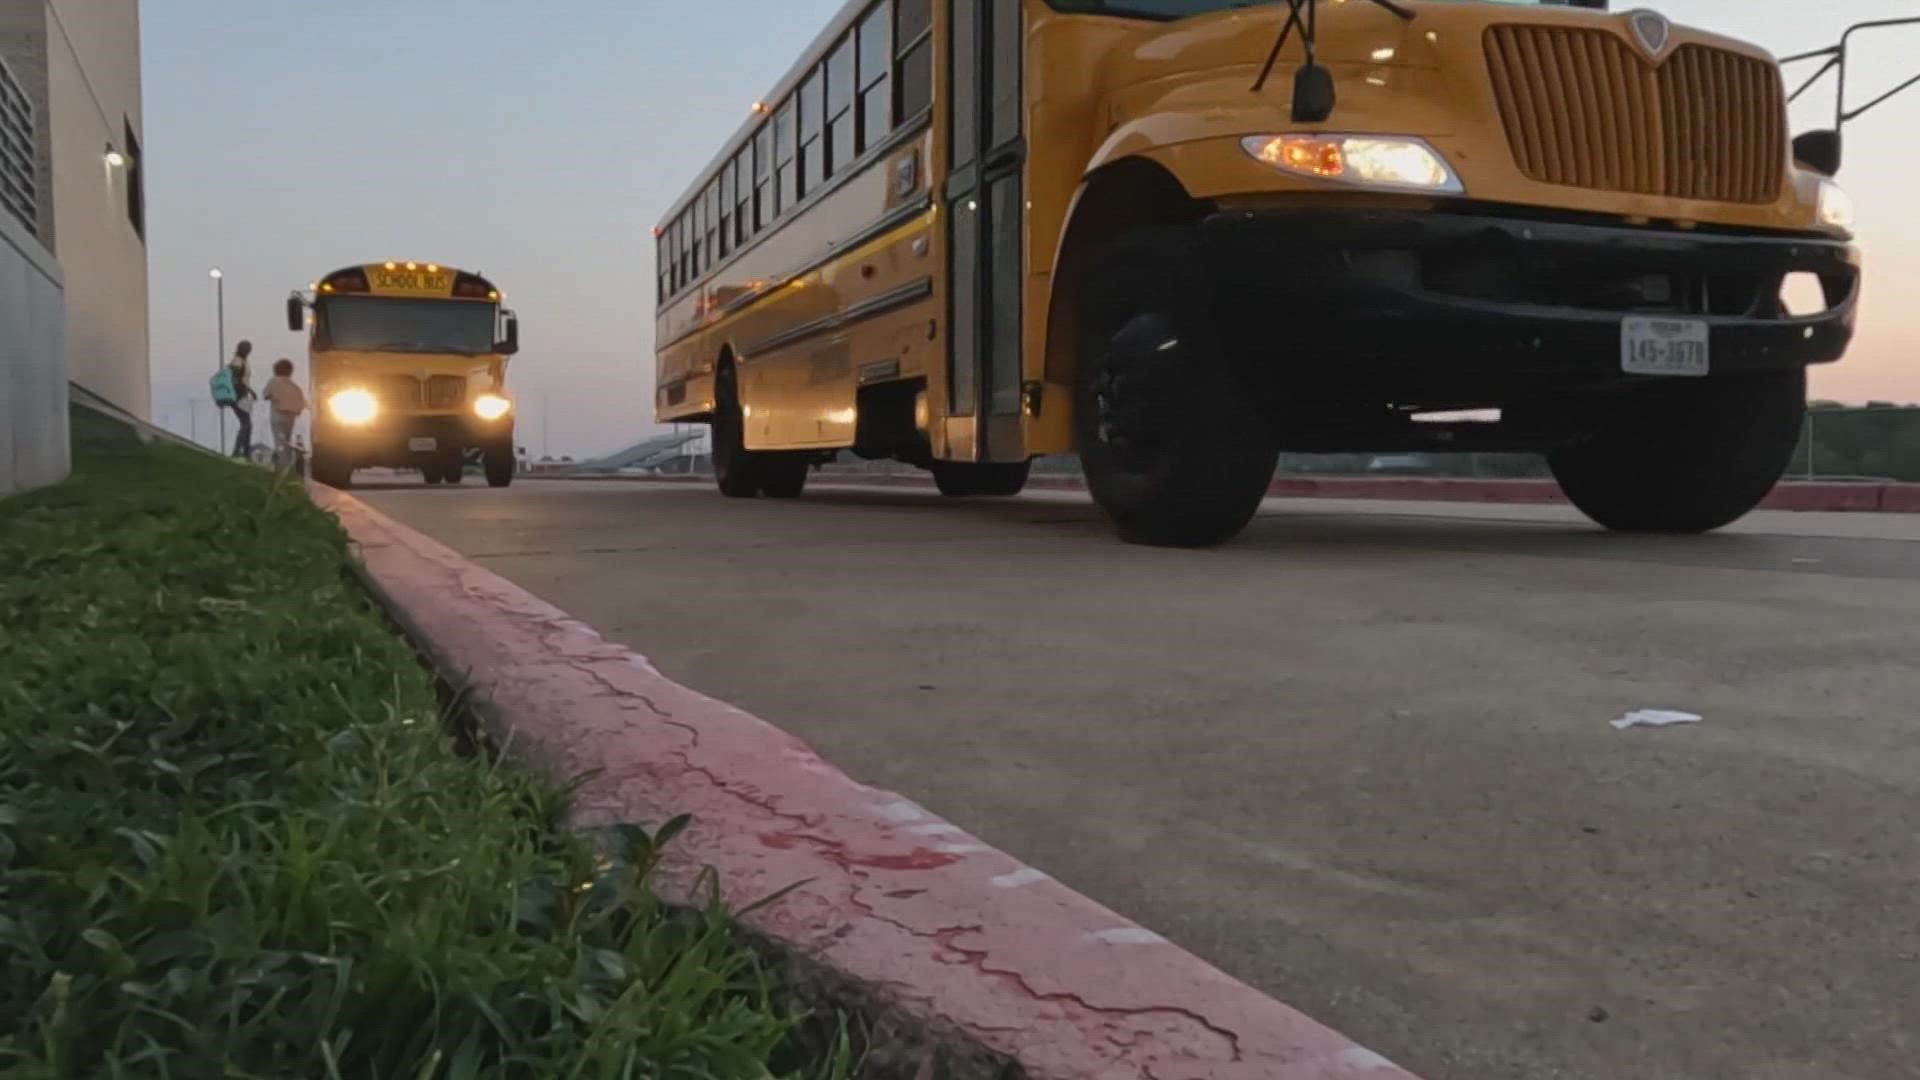 Recruiting efforts continue for some North Texas school districts dealing with school bus driver shortages. Safety remains key transportation focus.